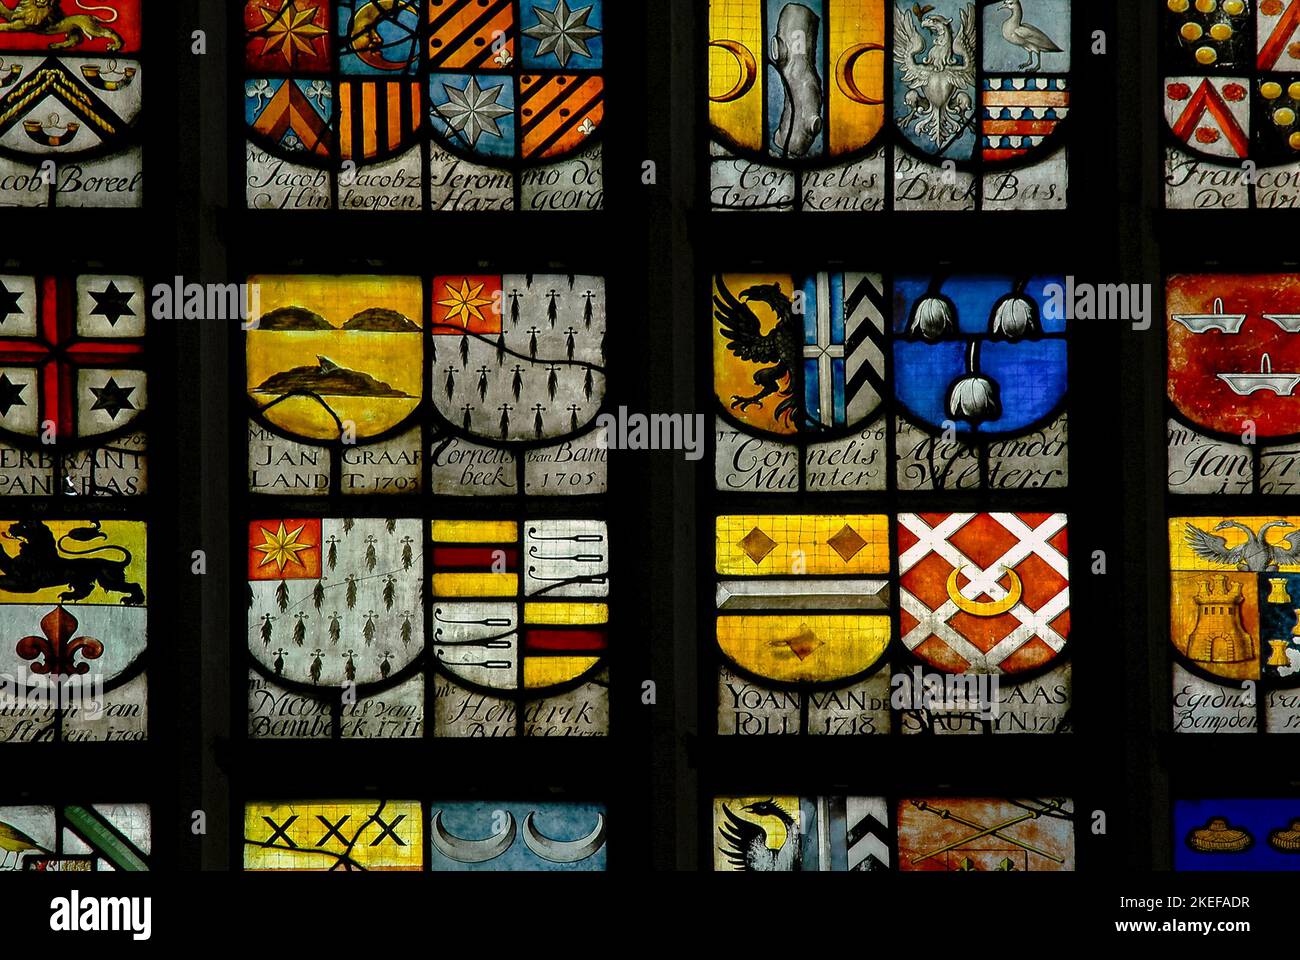 Amsterdam’s early-18th century civic leaders are commemorated by these colourful heraldic stained glass shields in a window in the Dutch city’s earliest building, the Oude Kerk or Old Church in Ouderkerksplein.  Mayors or burgemeesters from 1578 to 1757 are recorded in this window, while a second window features the arms of their successors from 1757 to 1795, plus some early 1800s aldermen. Stock Photo